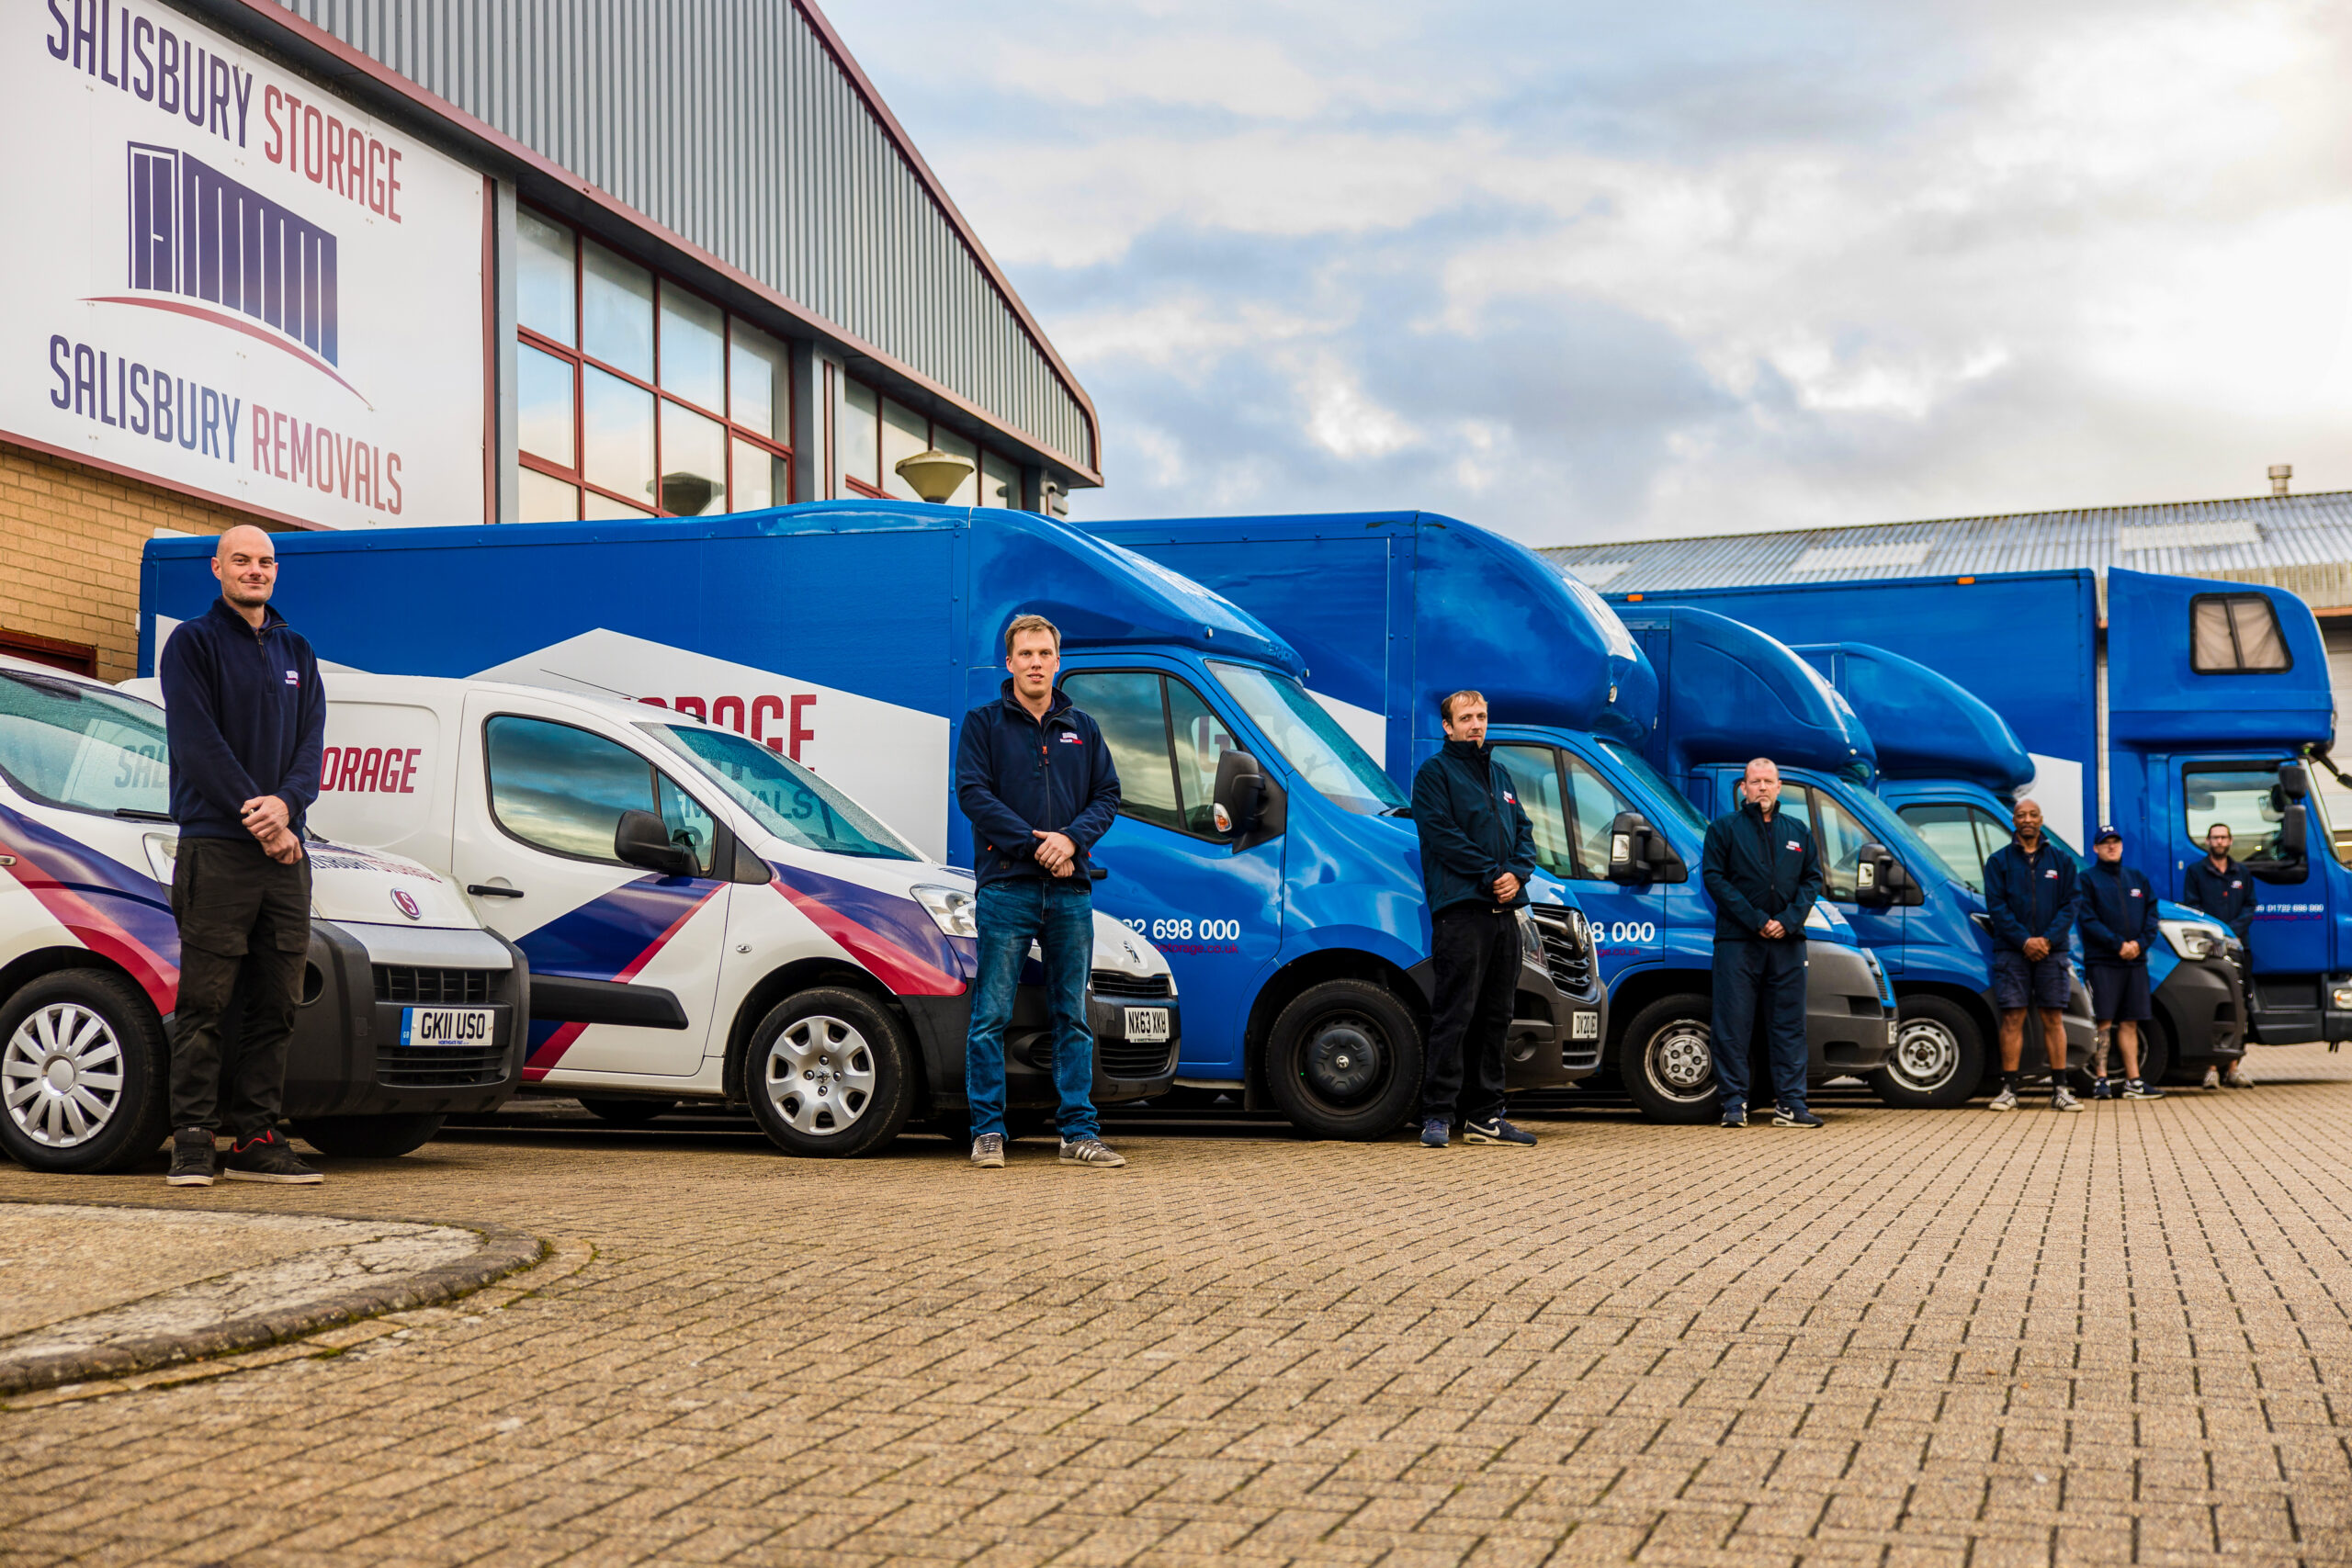 A group of men standing in front of blue vans and lorries, ready for a removal and storage journey.